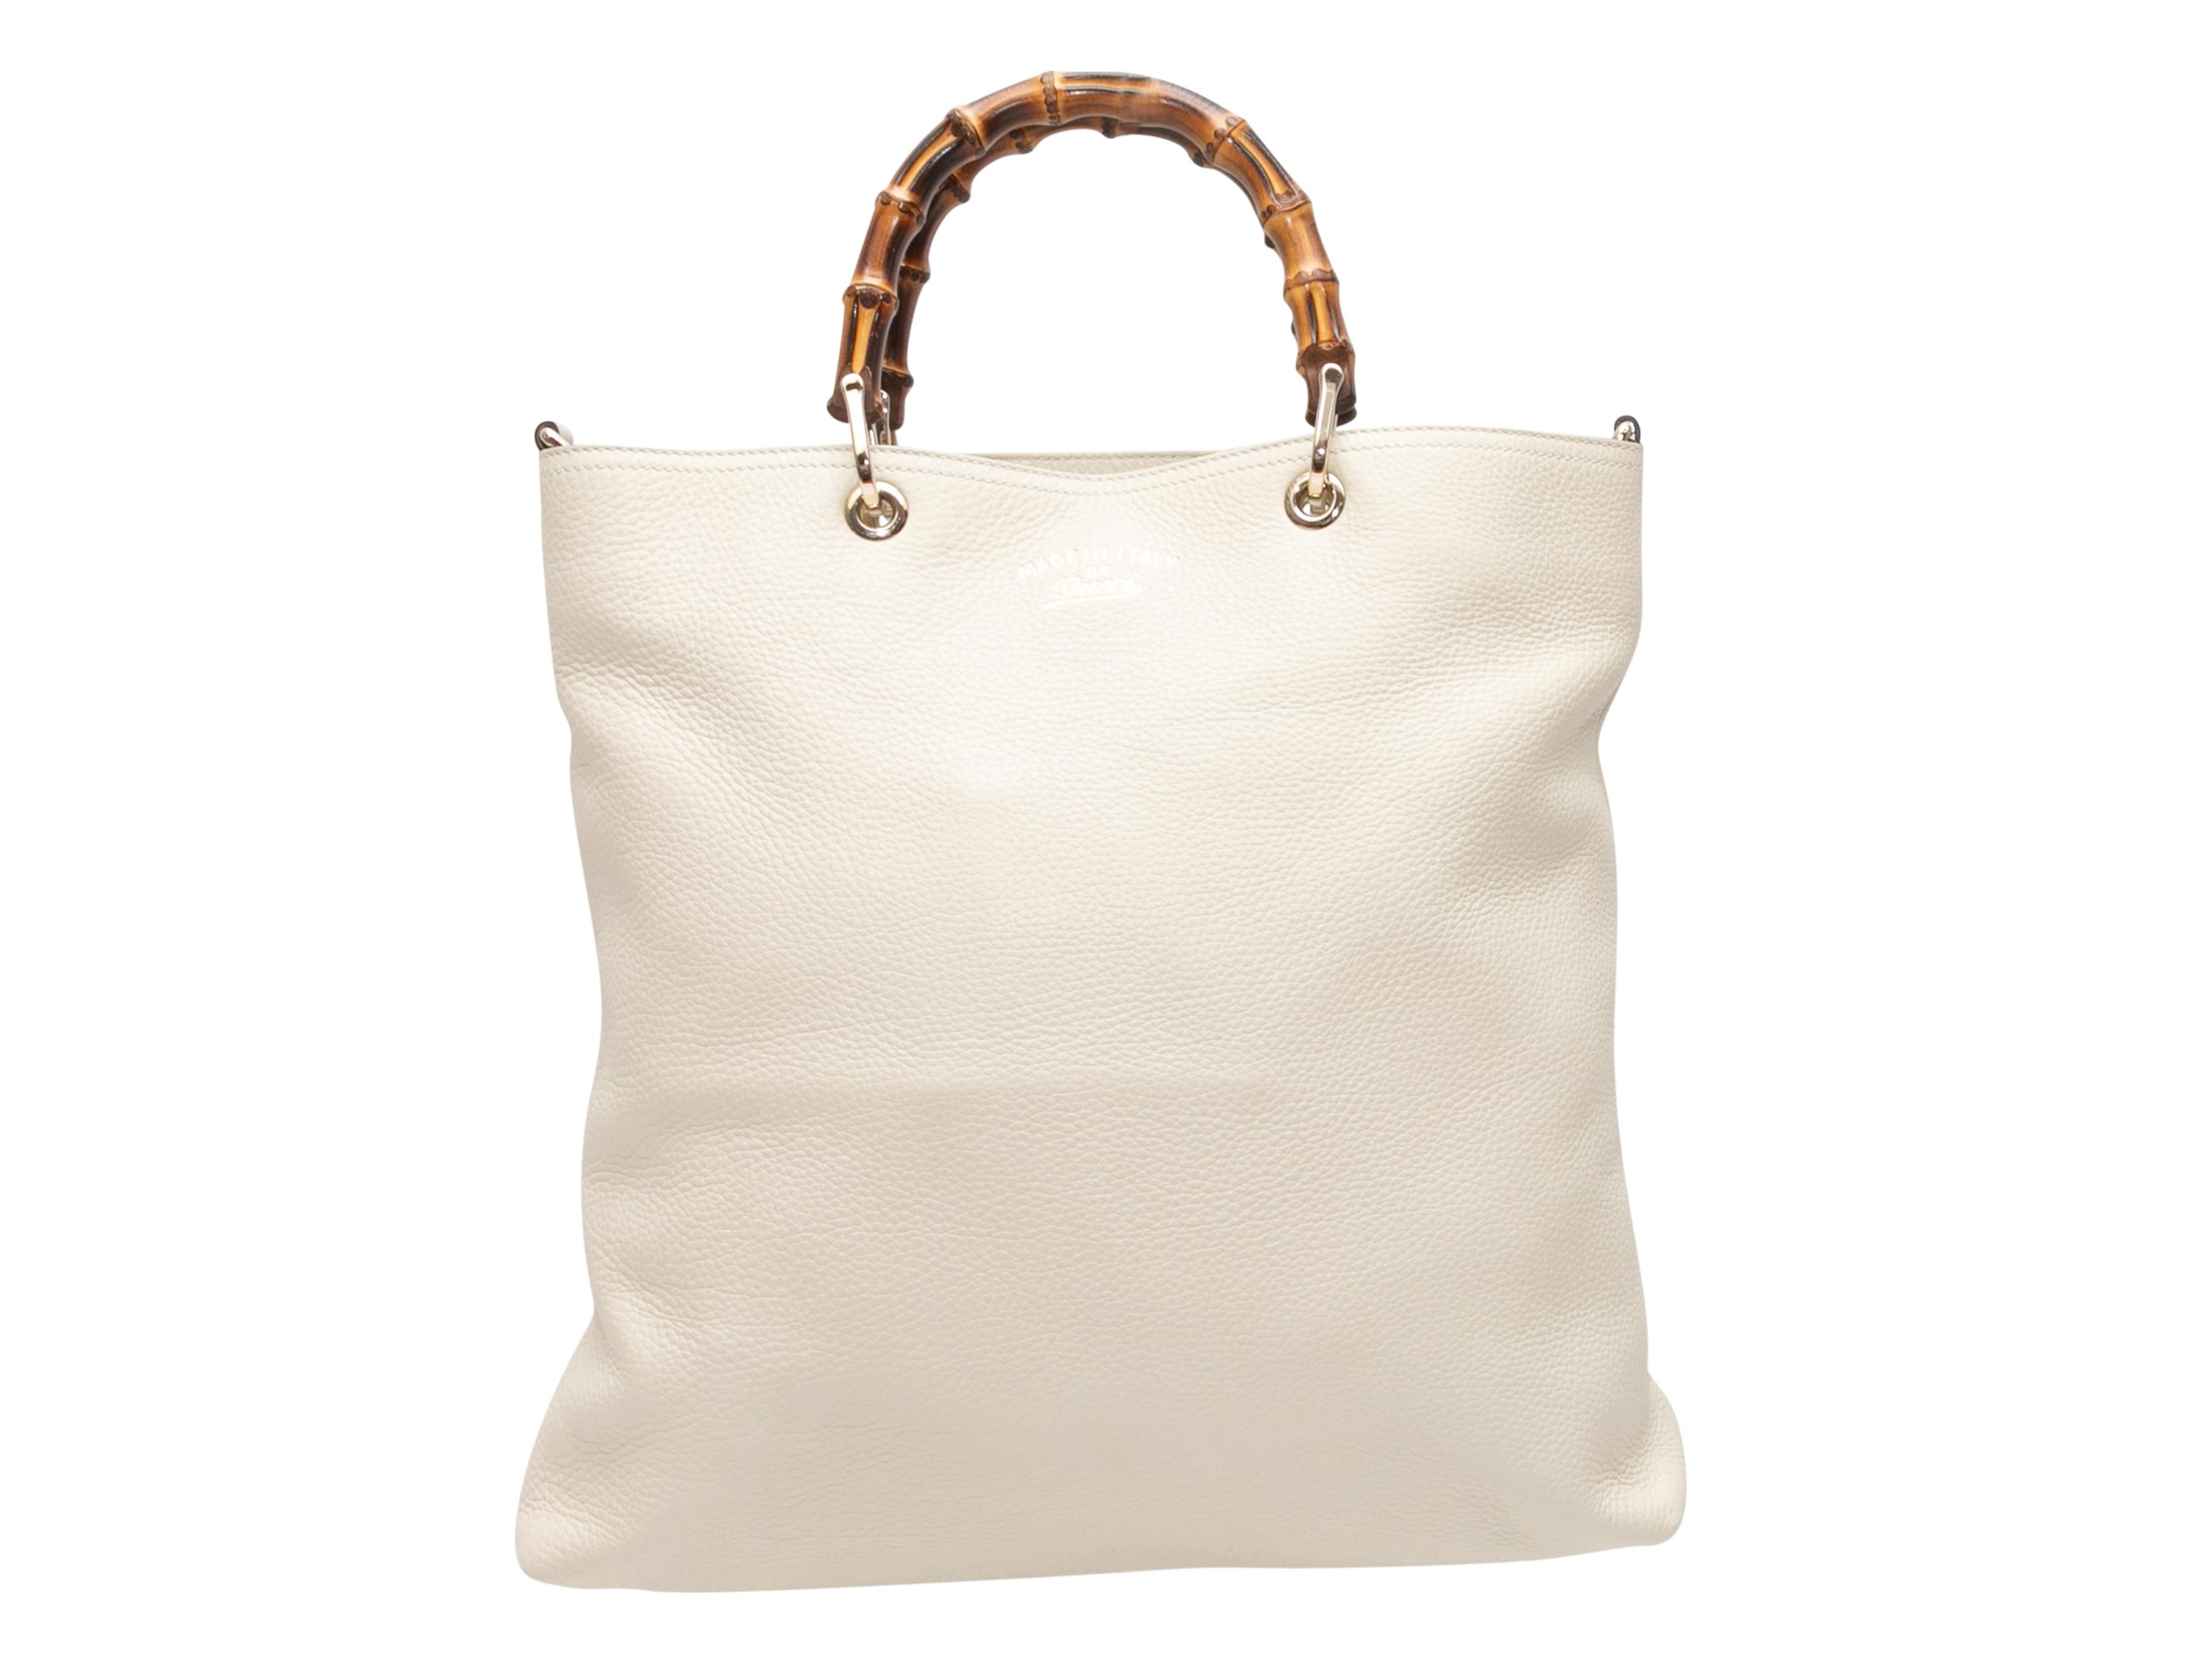 Women's or Men's White Gucci Leather & Bamboo Shopping Tote